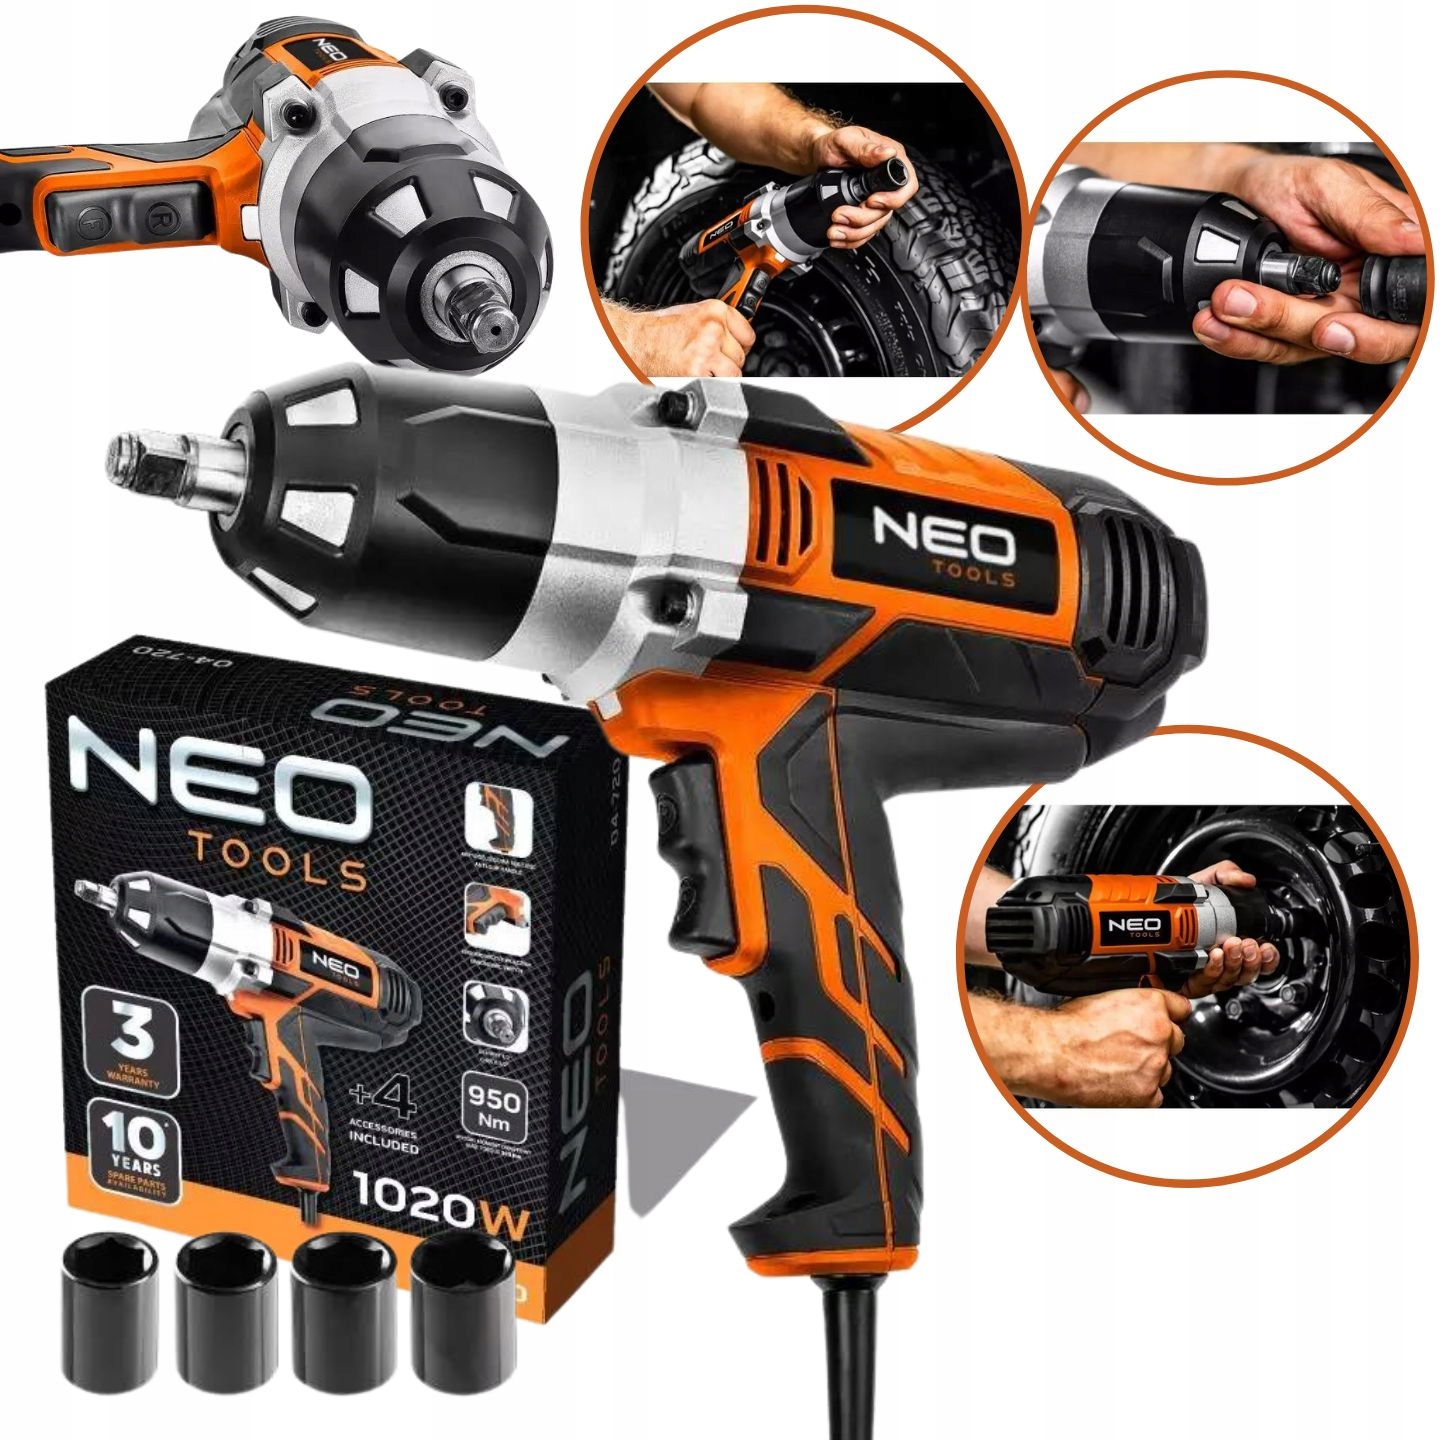 Neo Tools Electric Impact Wrench 1020W 950Nm